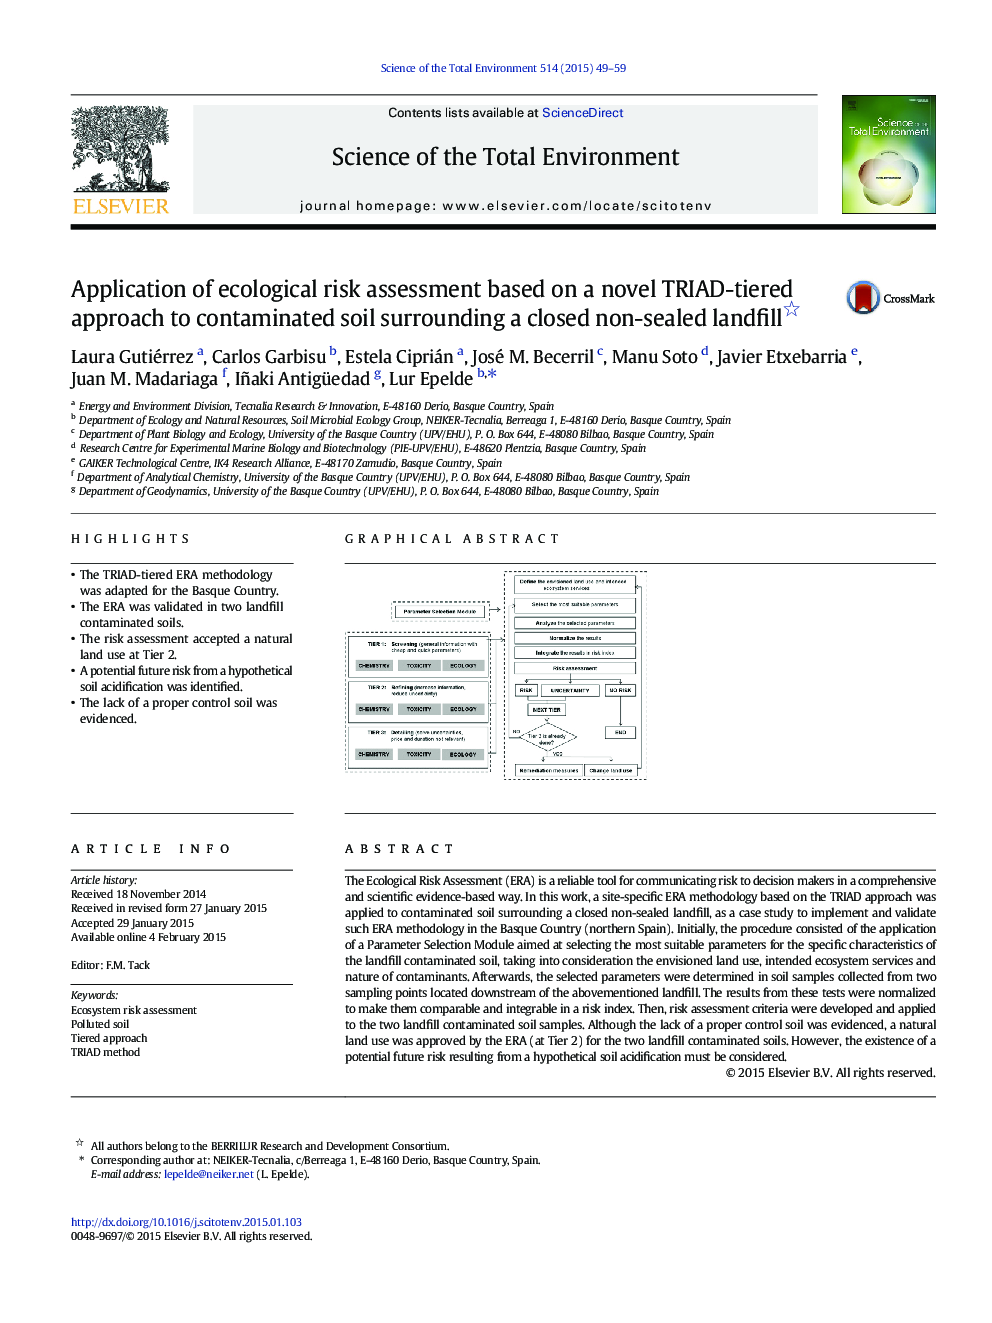 Application of ecological risk assessment based on a novel TRIAD-tiered approach to contaminated soil surrounding a closed non-sealed landfill